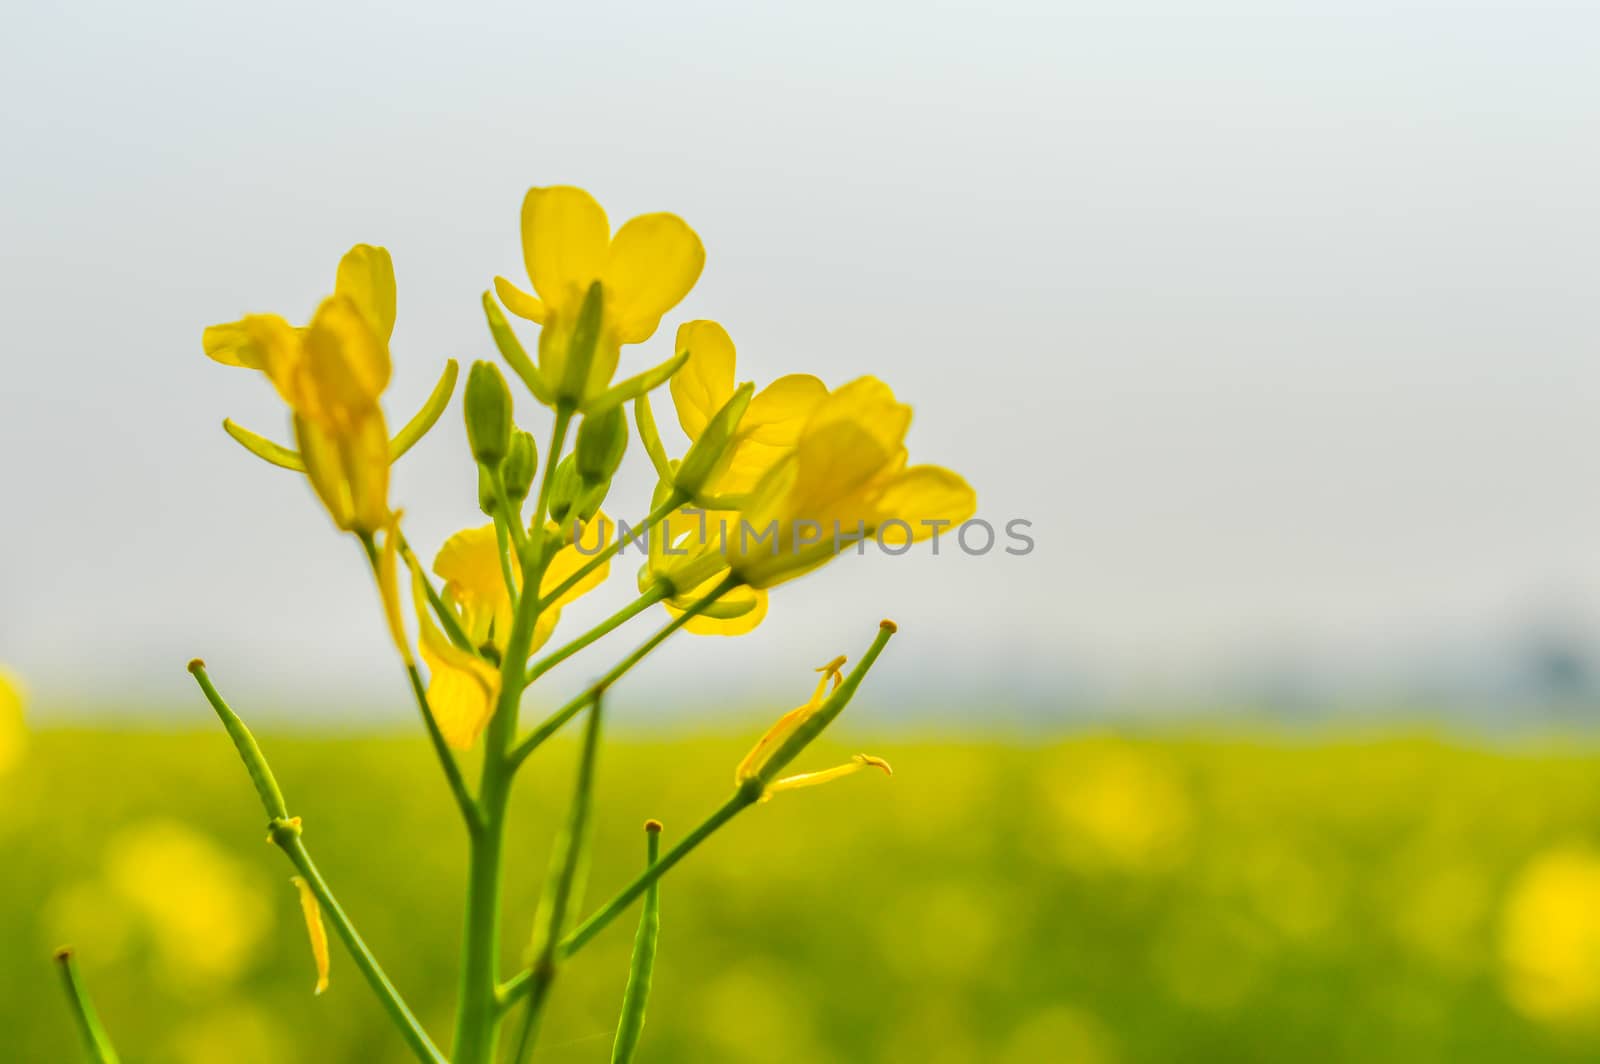 Rapeseed flower close up isolated on blurred background and its  by sudiptabhowmick